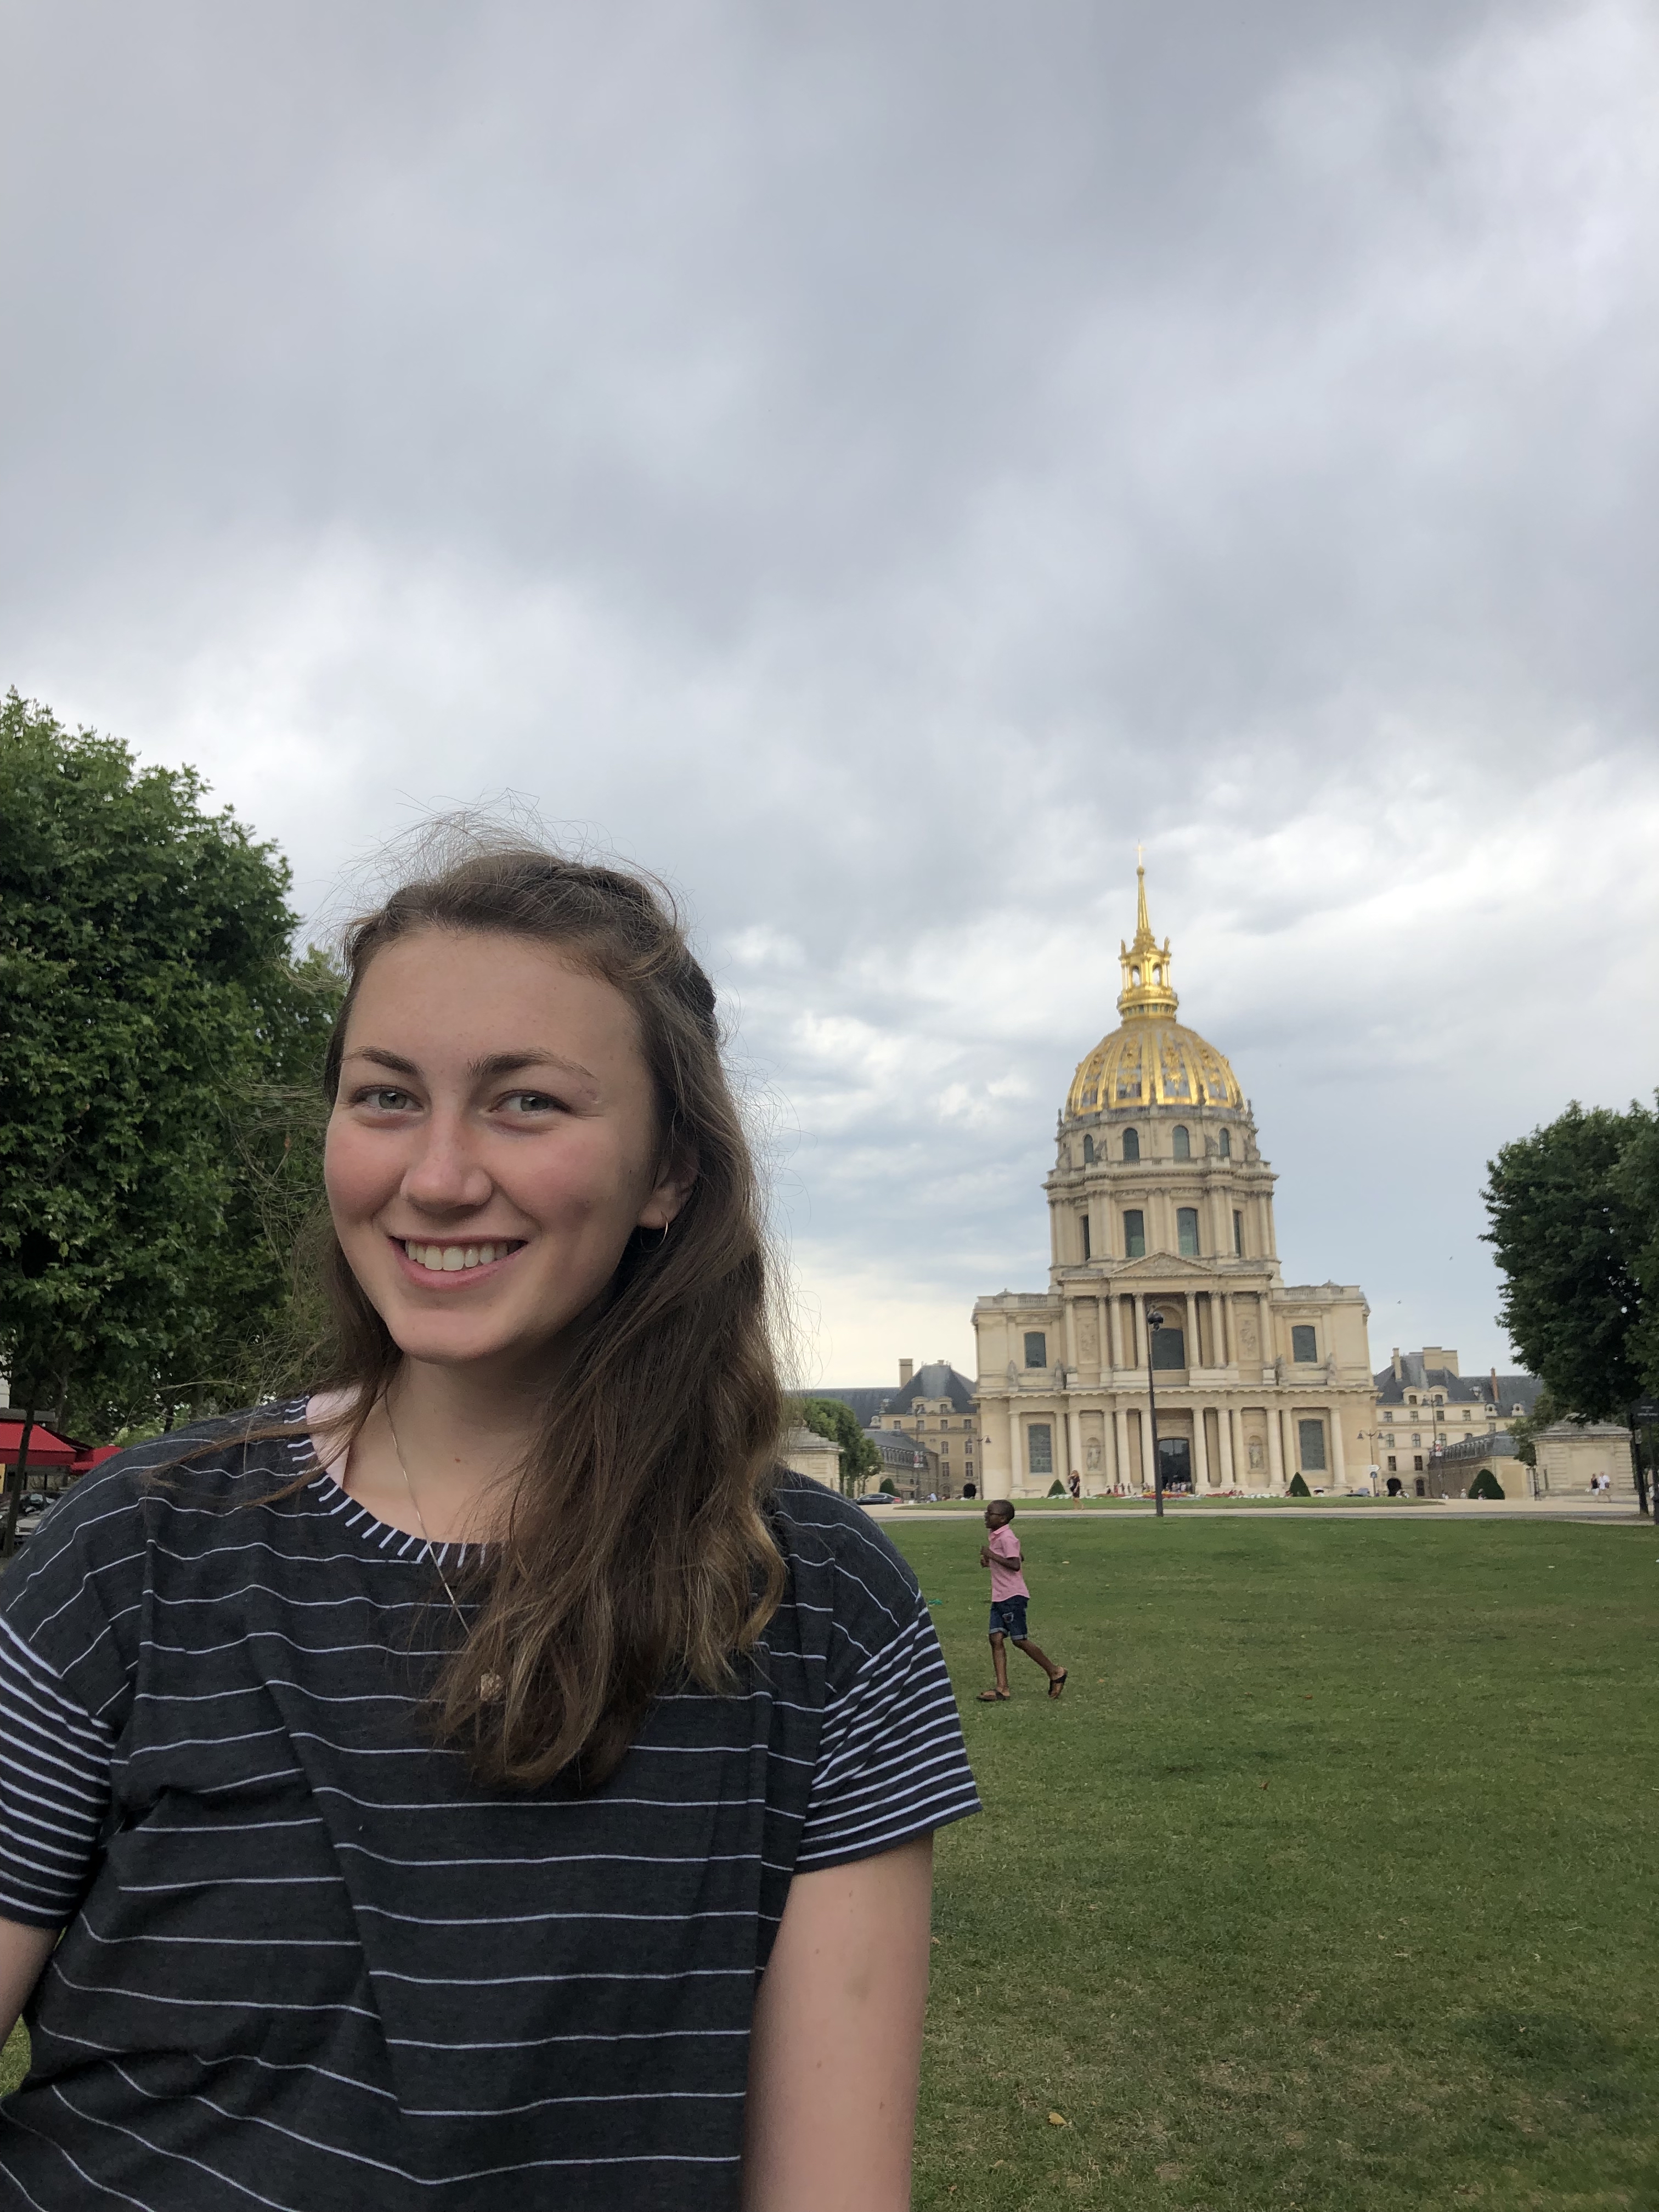 Girl next to building with gold dome in france